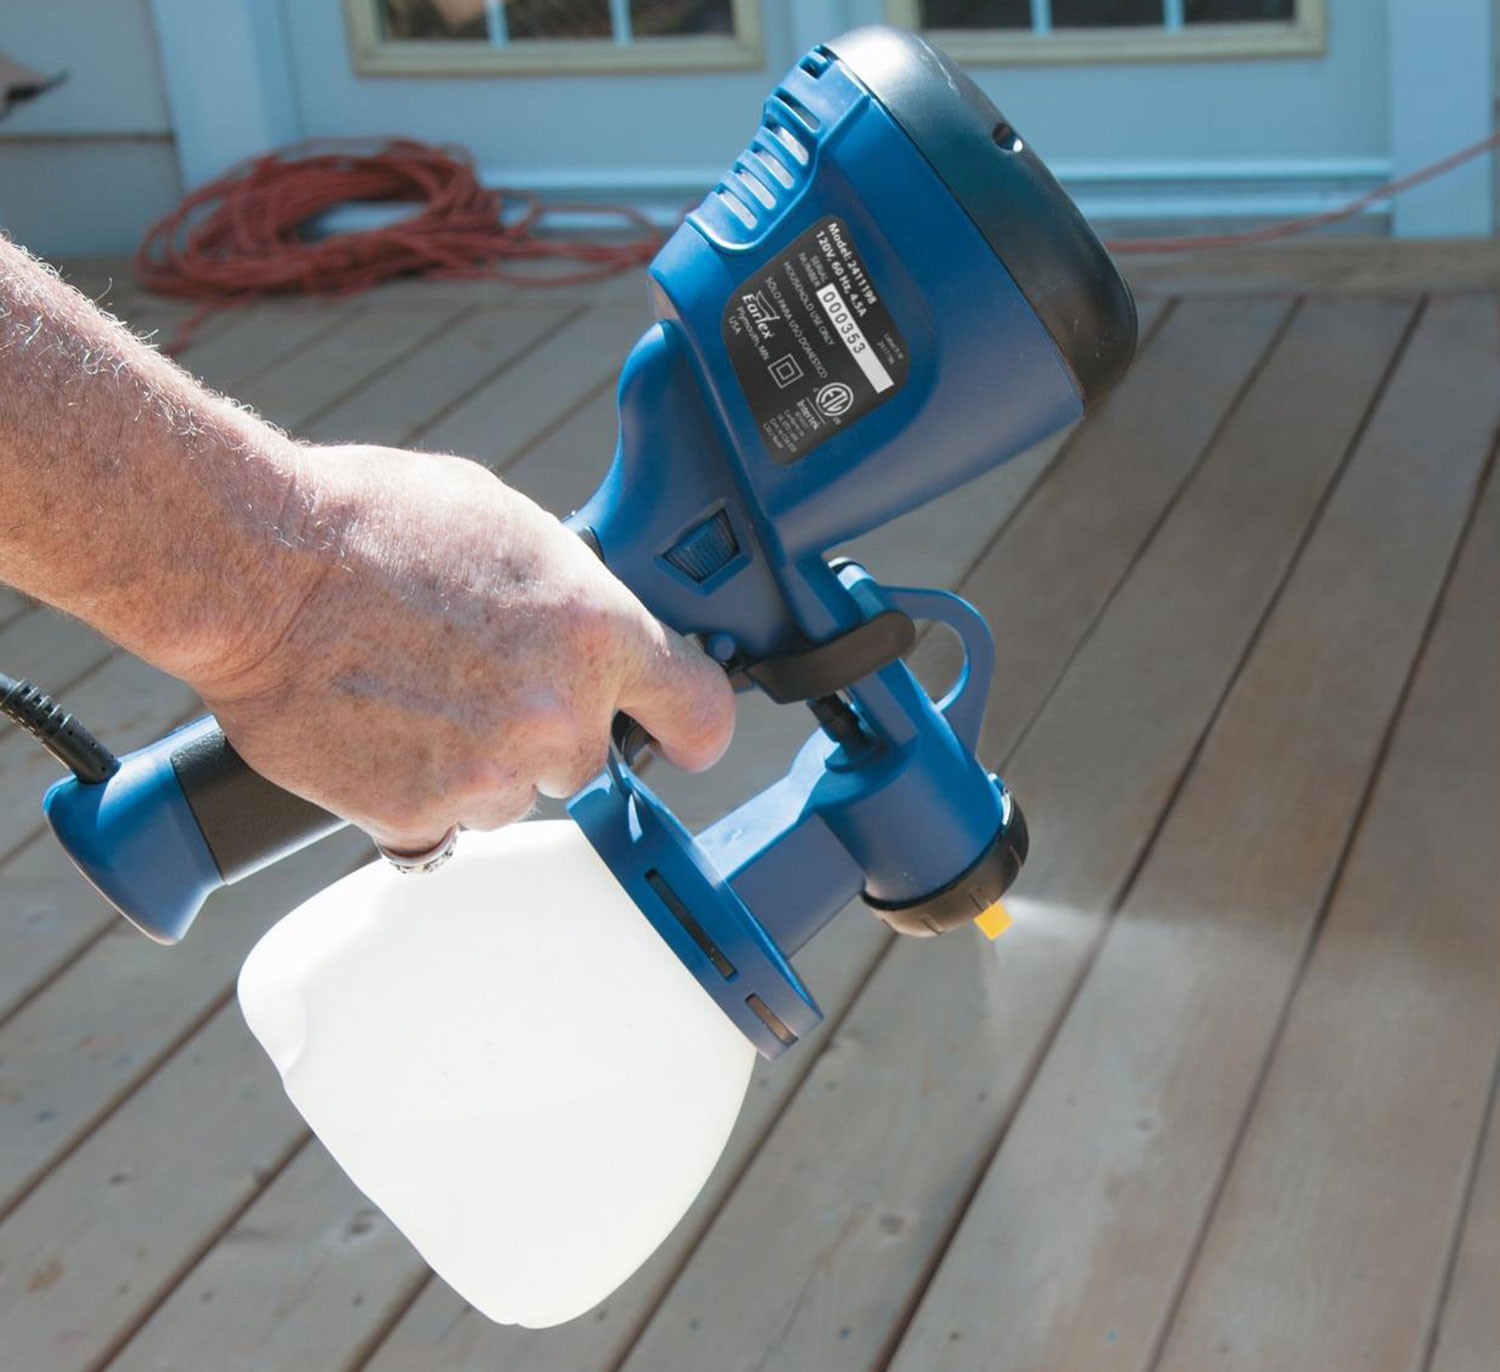 Staining a deck with the Earlex All-In-One sprayer.